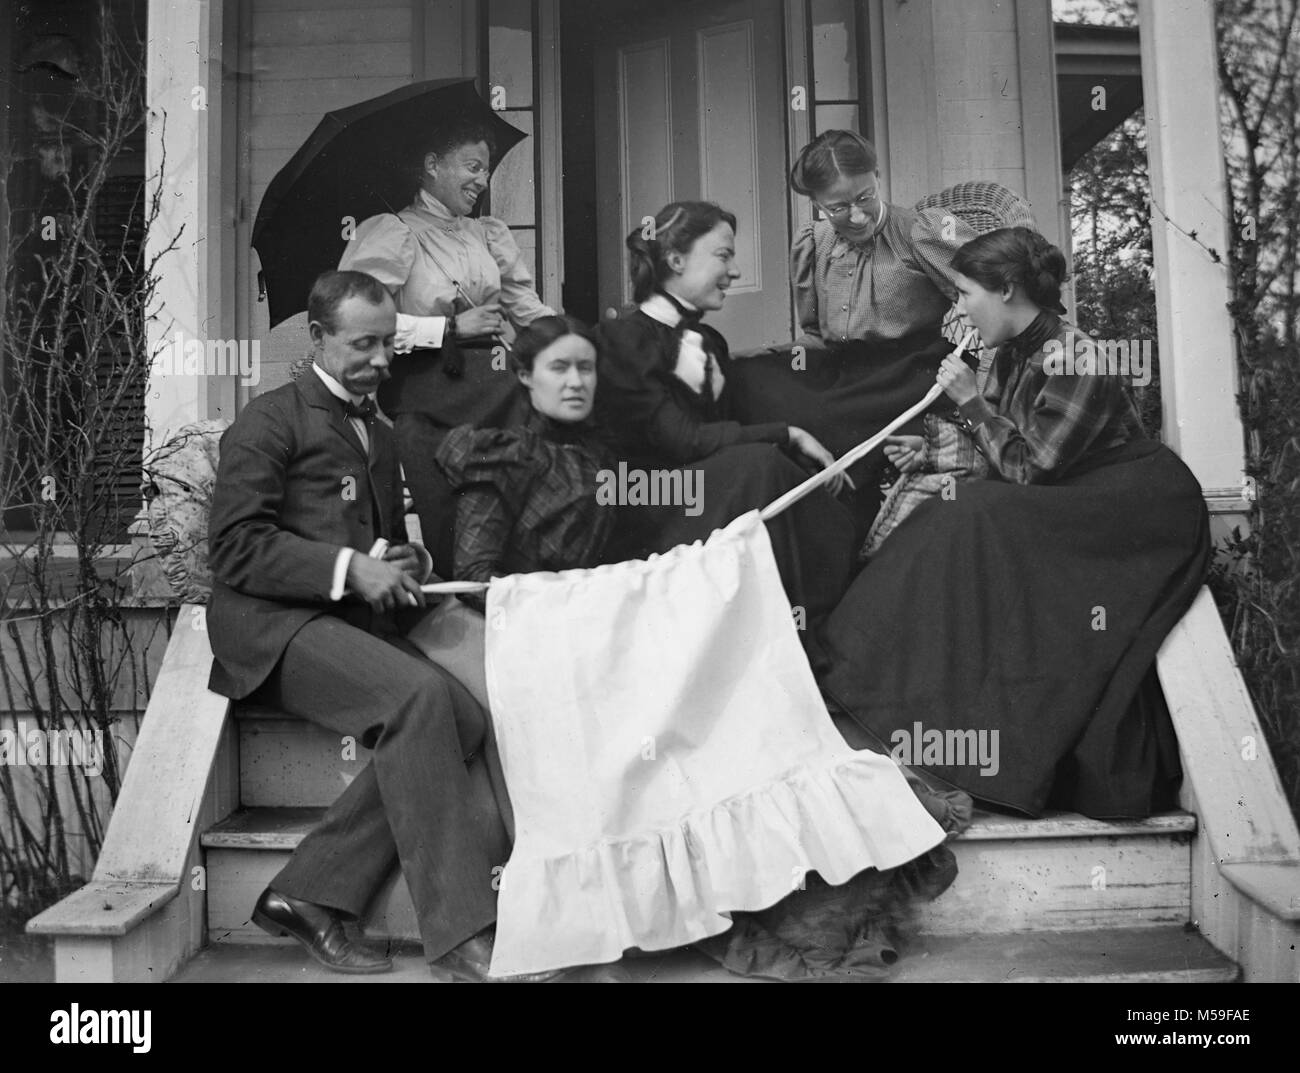 Wacky Victorians appear to hide a child behind an apron for a photo on the front porch, ca. 1900. Stock Photo